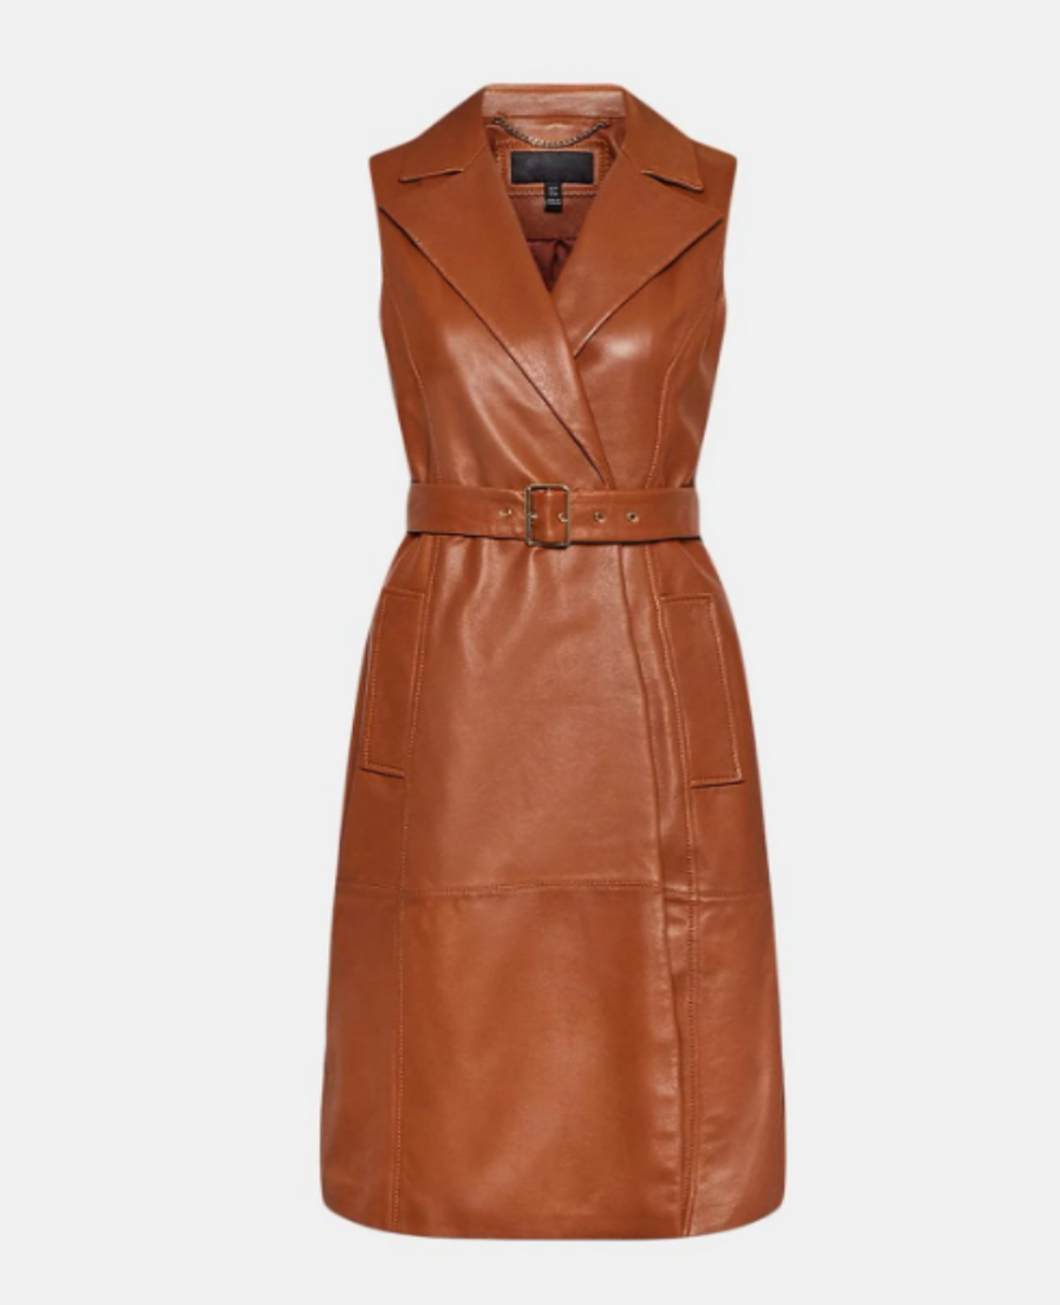 Womens Sleeveless Tan Brown Leather Trench Coat